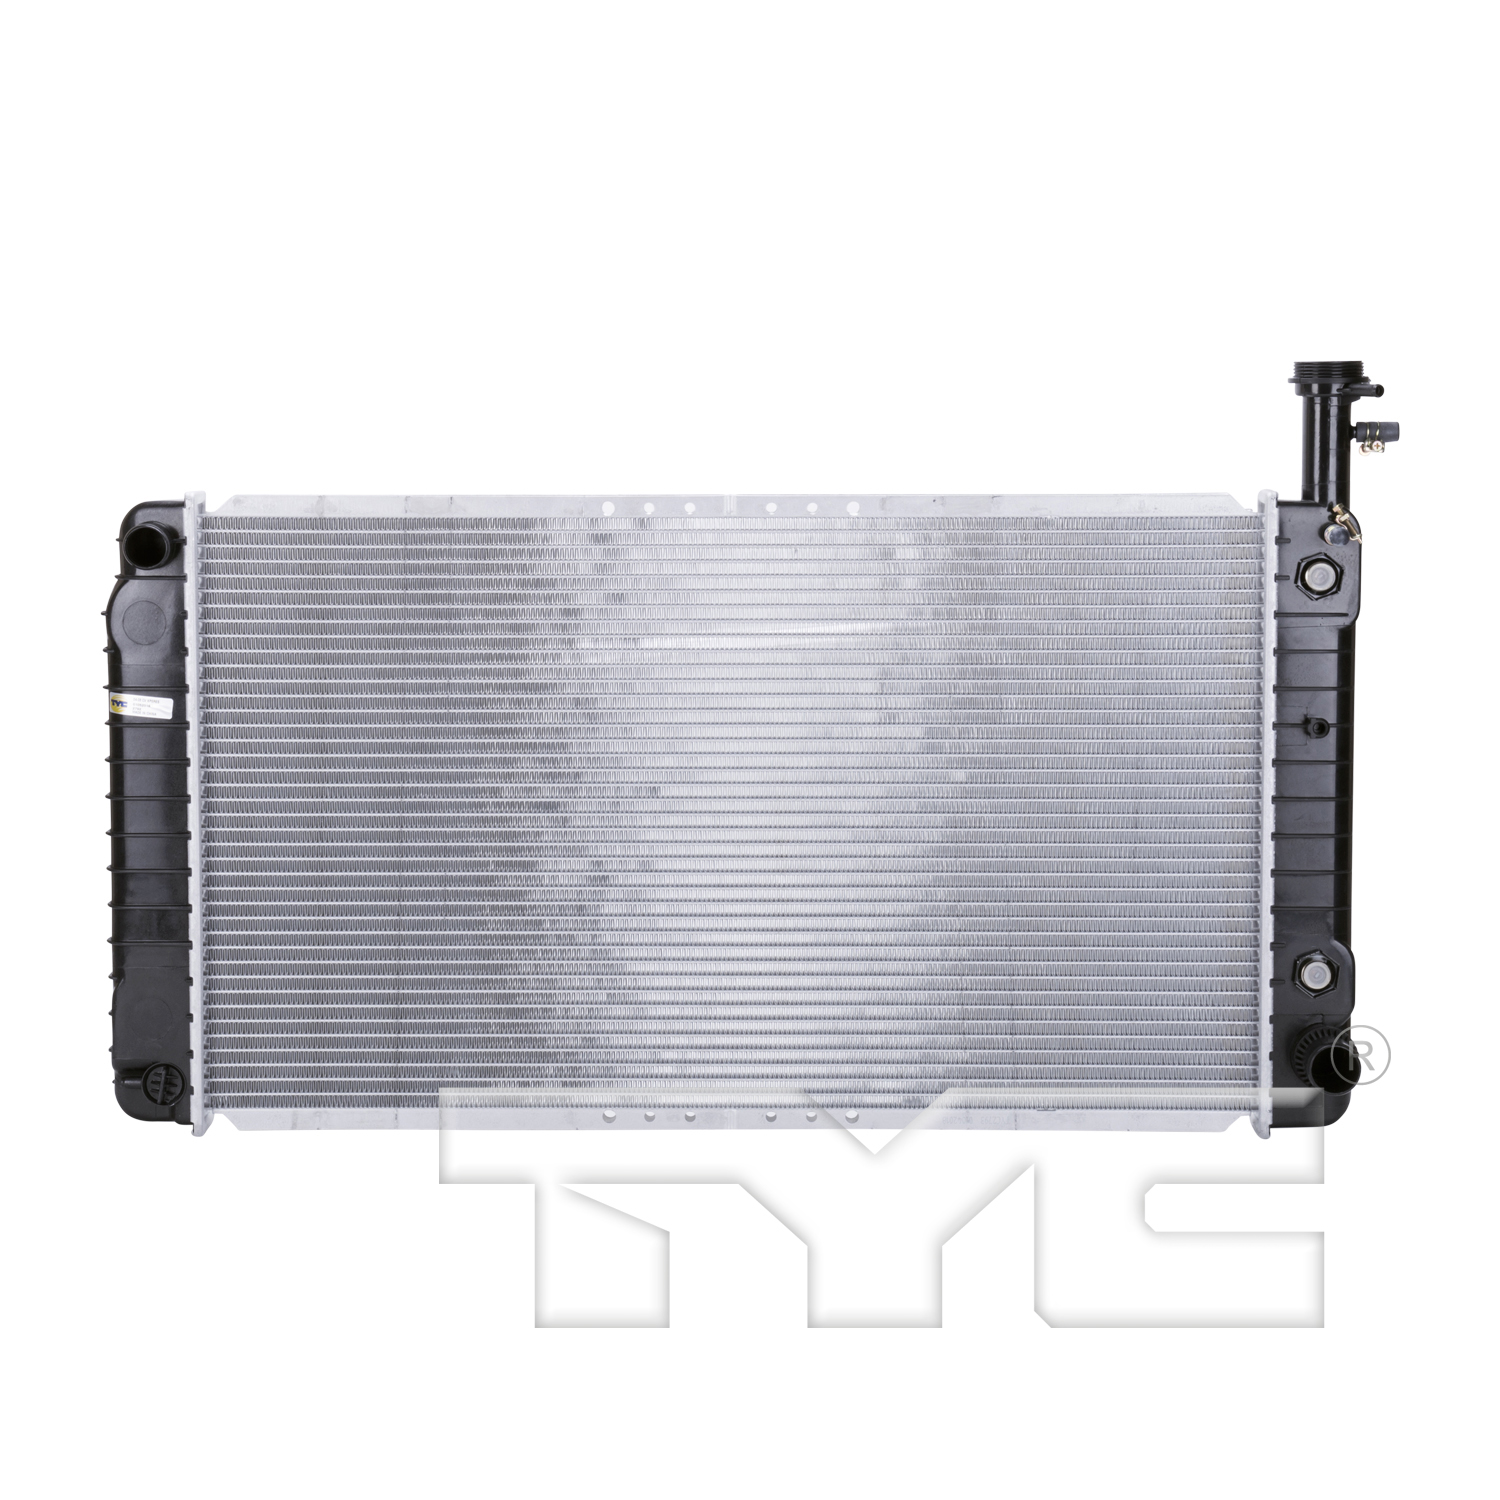 Aftermarket RADIATORS for CHEVROLET - EXPRESS 1500, EXPRESS 1500,04-14,Radiator assembly